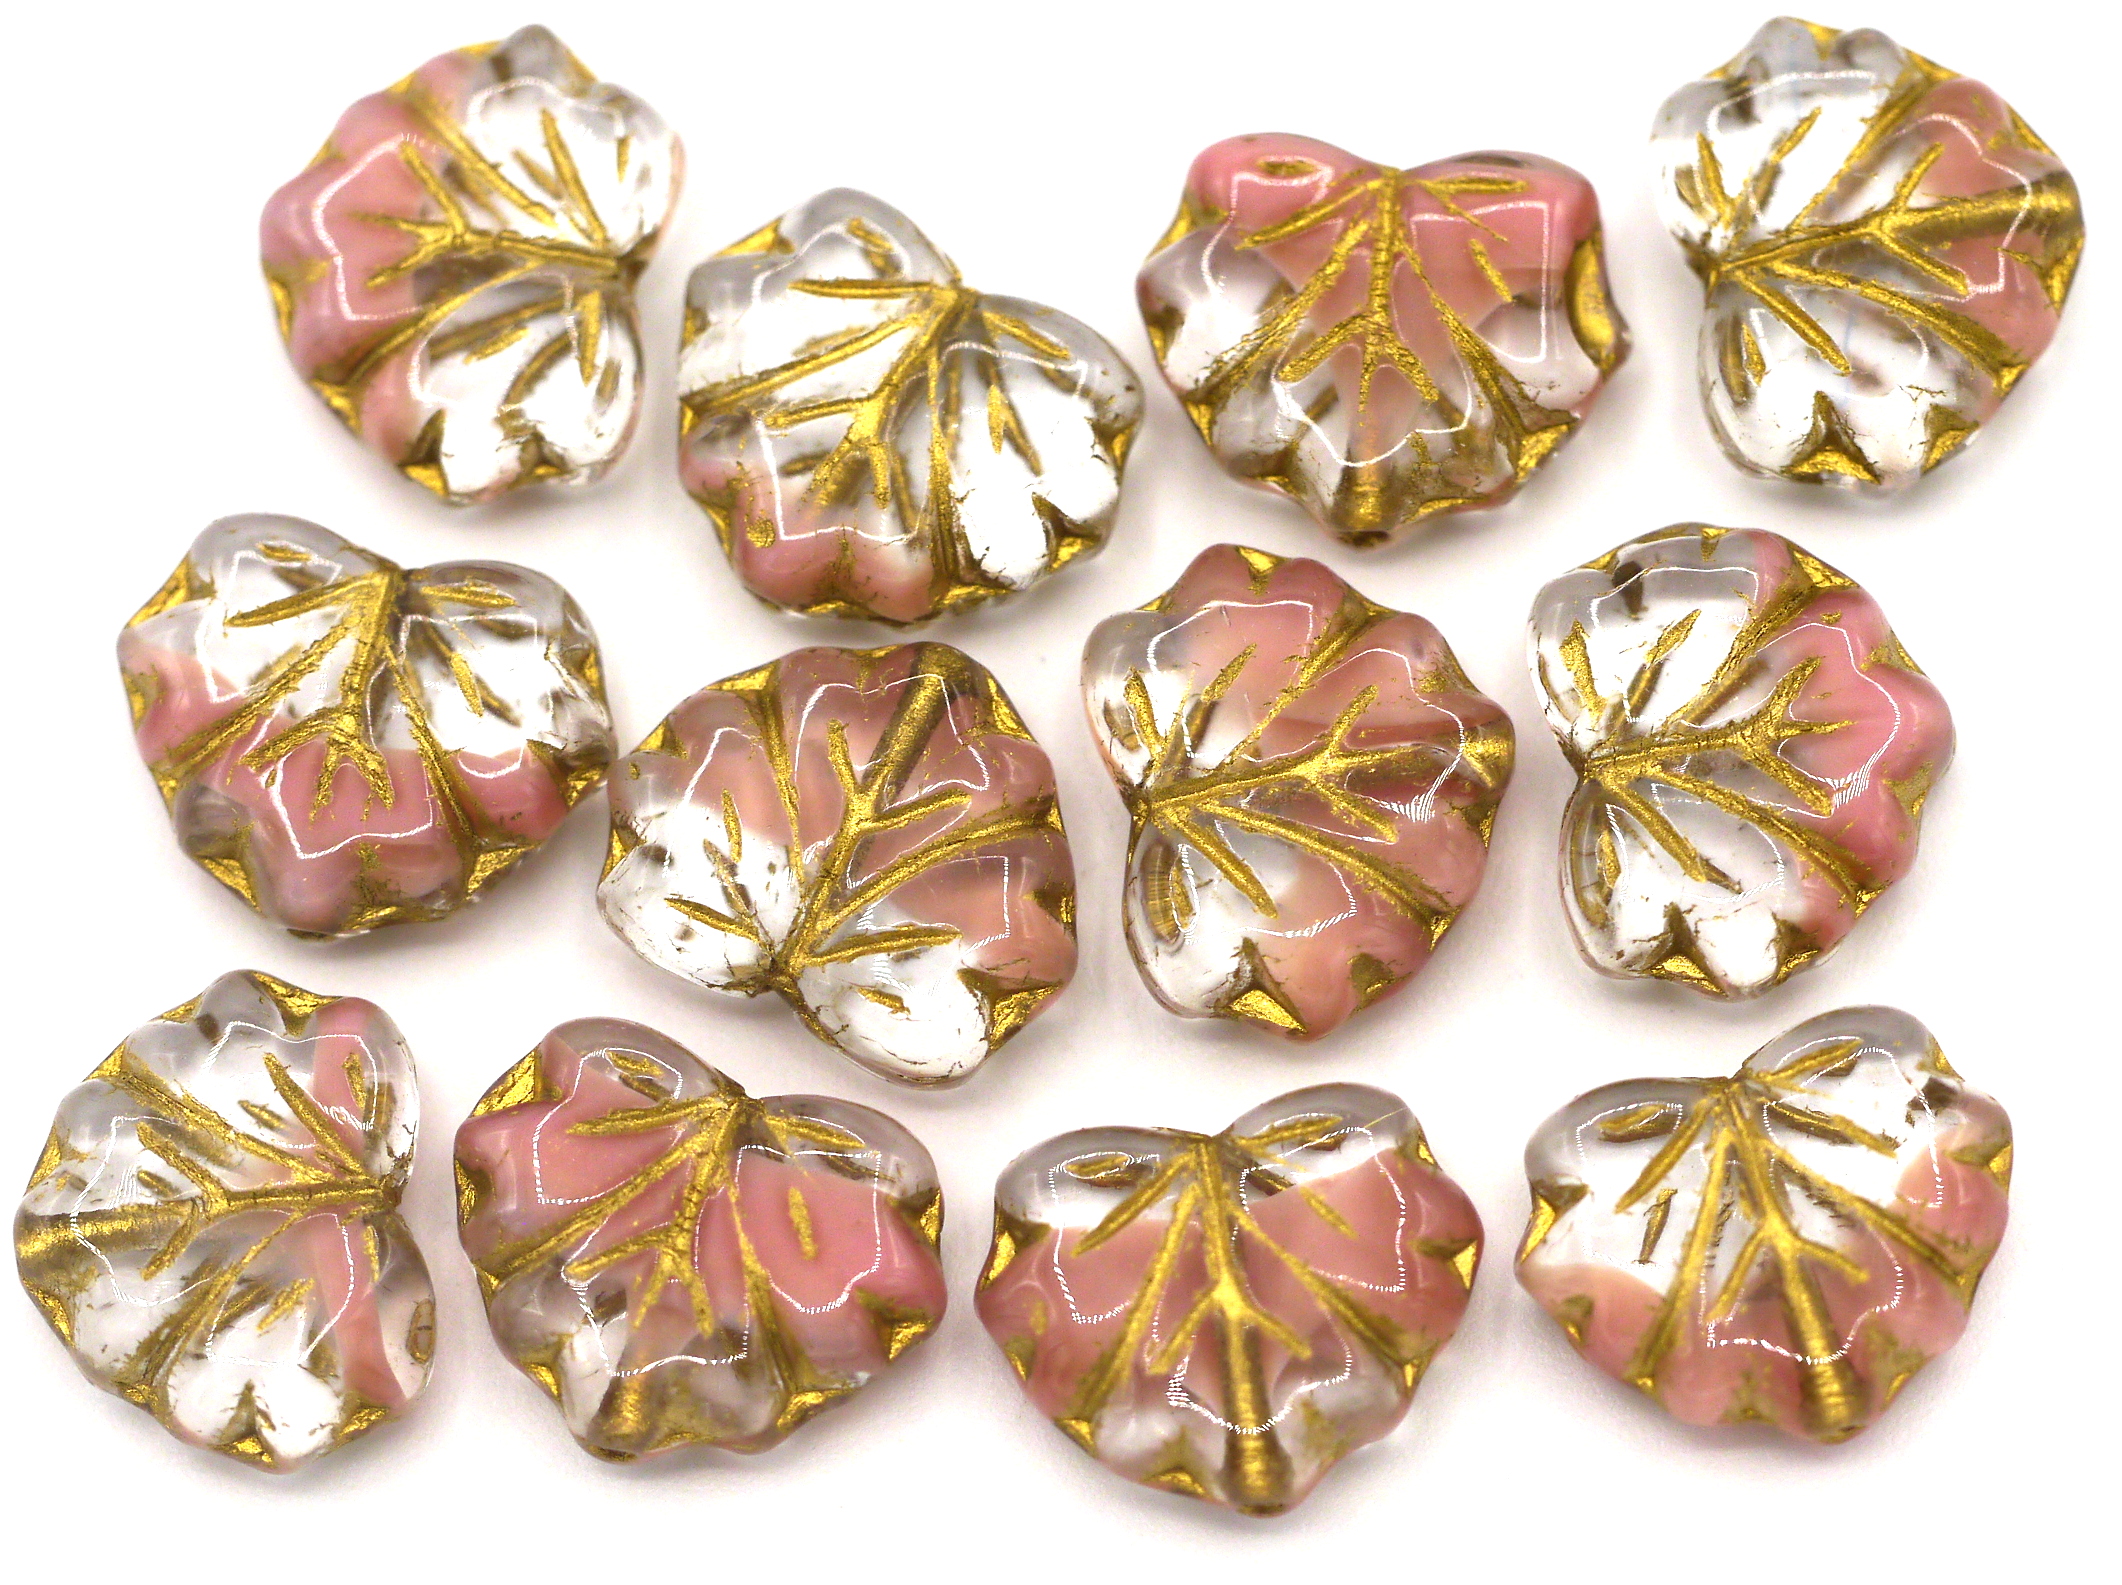 12pc 11x13mm Czech Pressed Glass Maple Leaf Beads, Crystal-Green Swirl/Gold  Wash